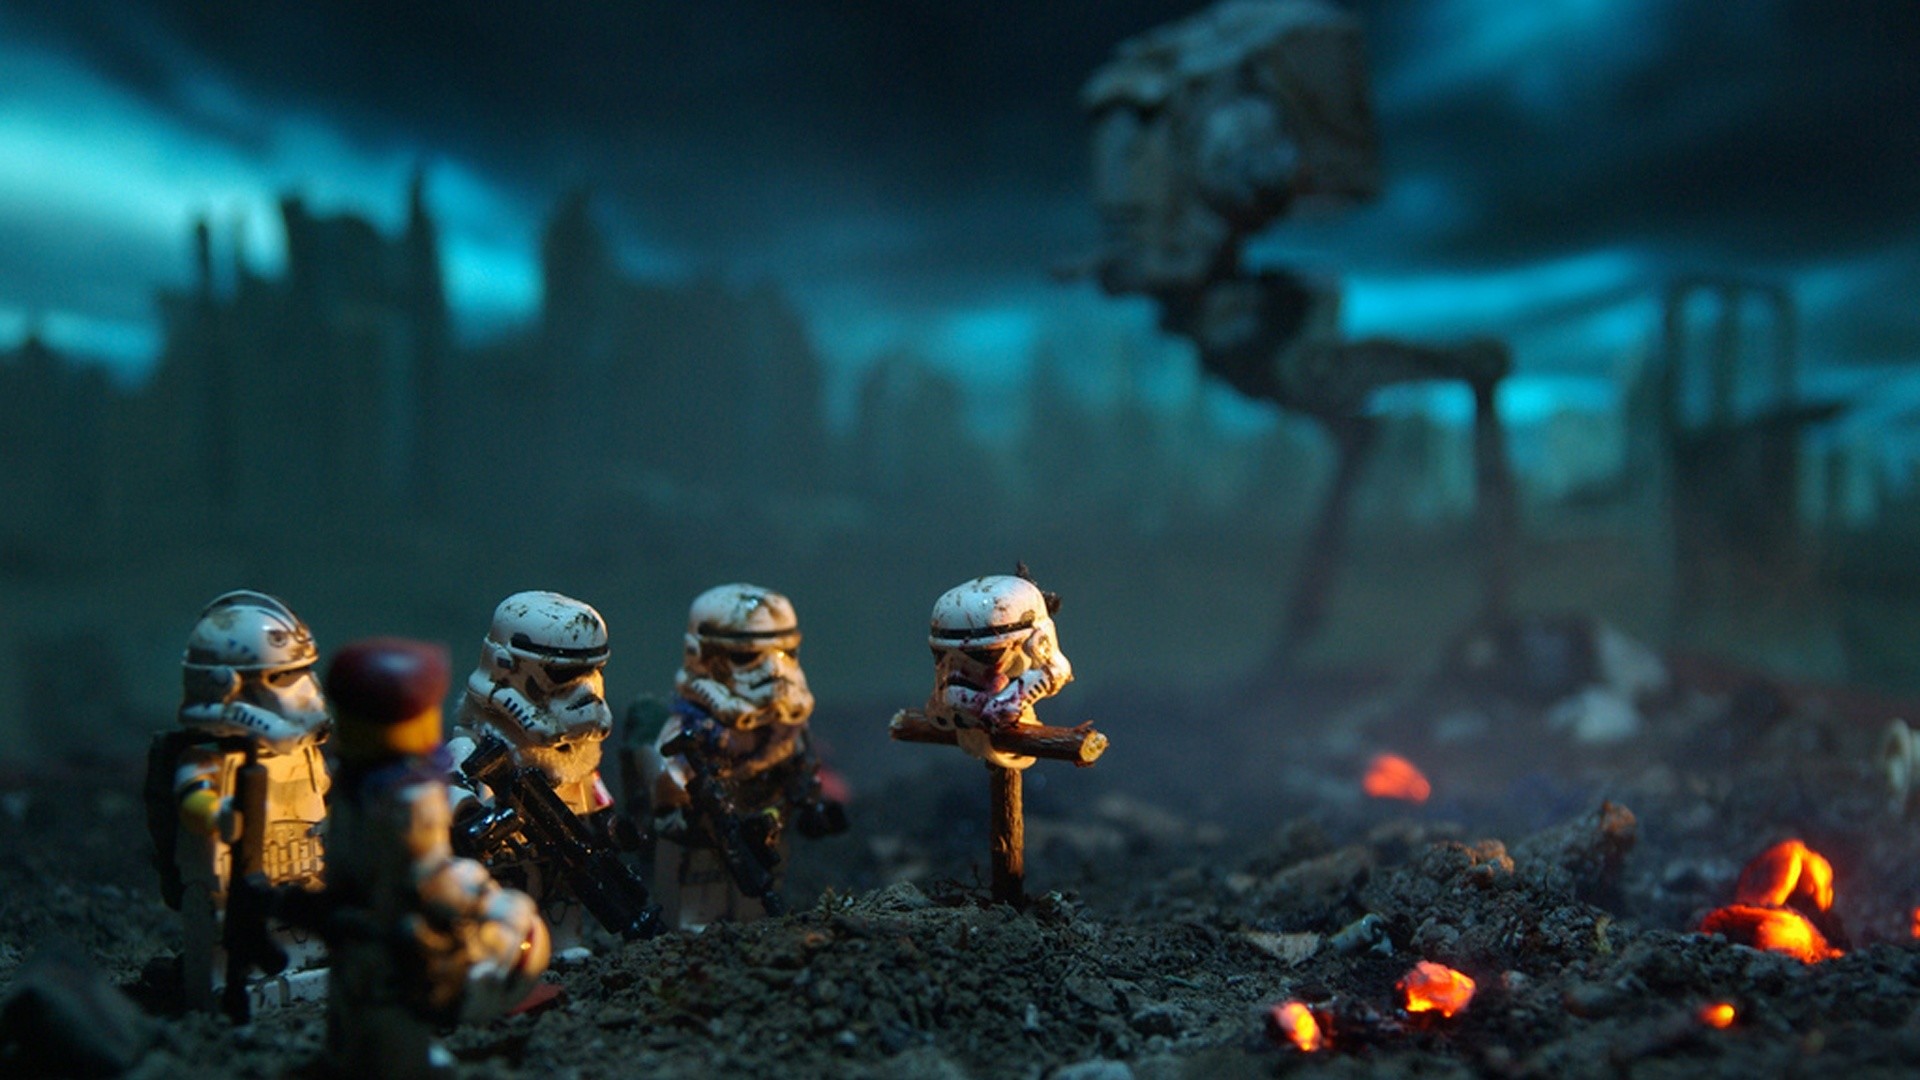 1920x1080 Lego Star Wars Stormtroopers Wallpapers HD Wallpapers 